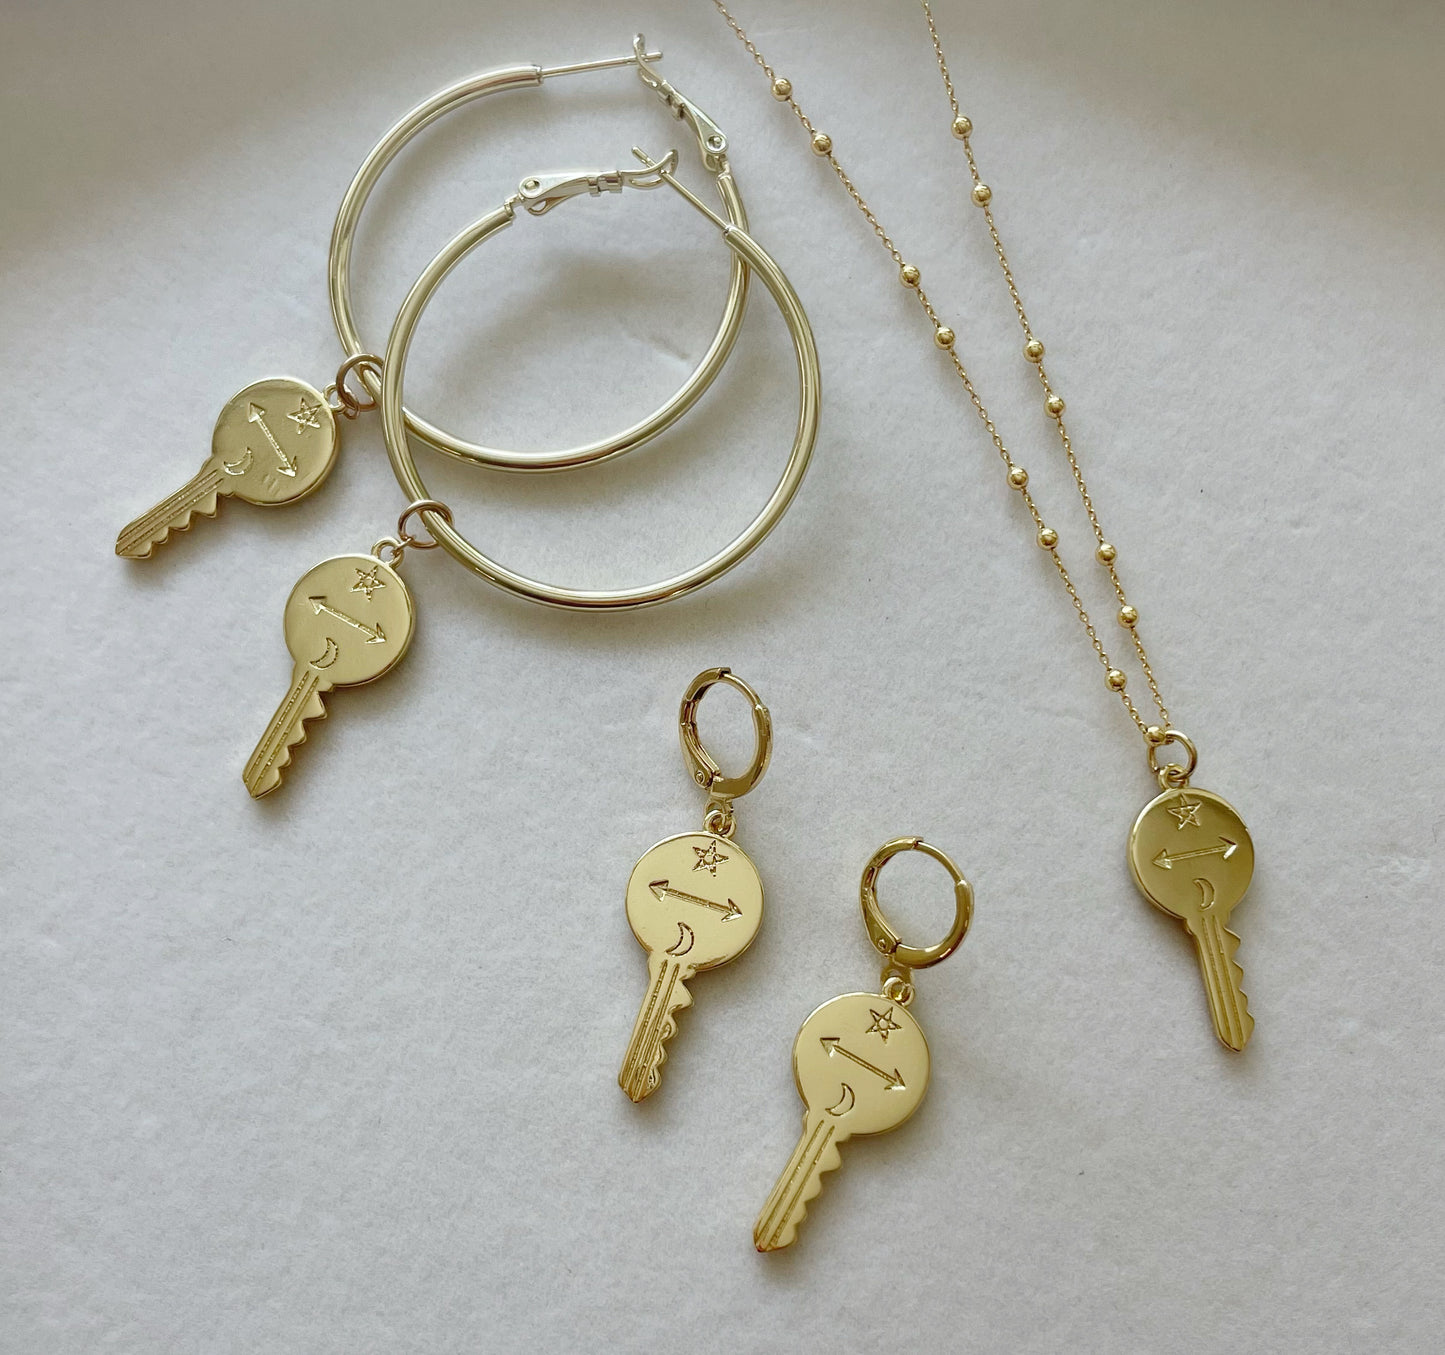 Free Your Mind Gold Filled Hoops with Key Charm